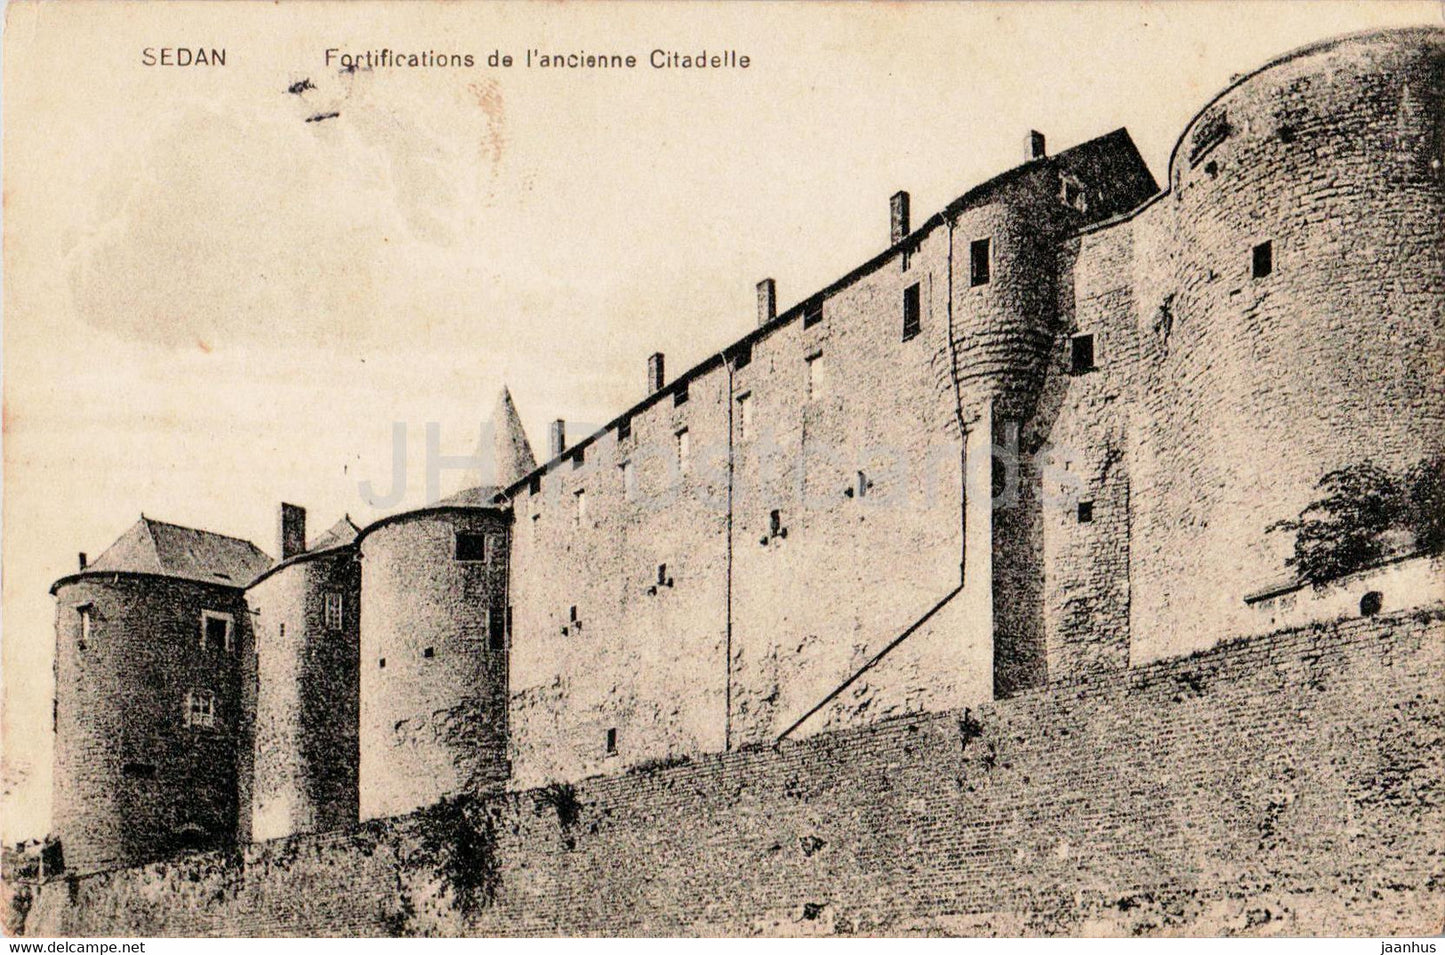 Sedan - Fortifications de l'ancienne Citadelle - Feldpost - military mail - old postcard - 1916 - France - used - JH Postcards